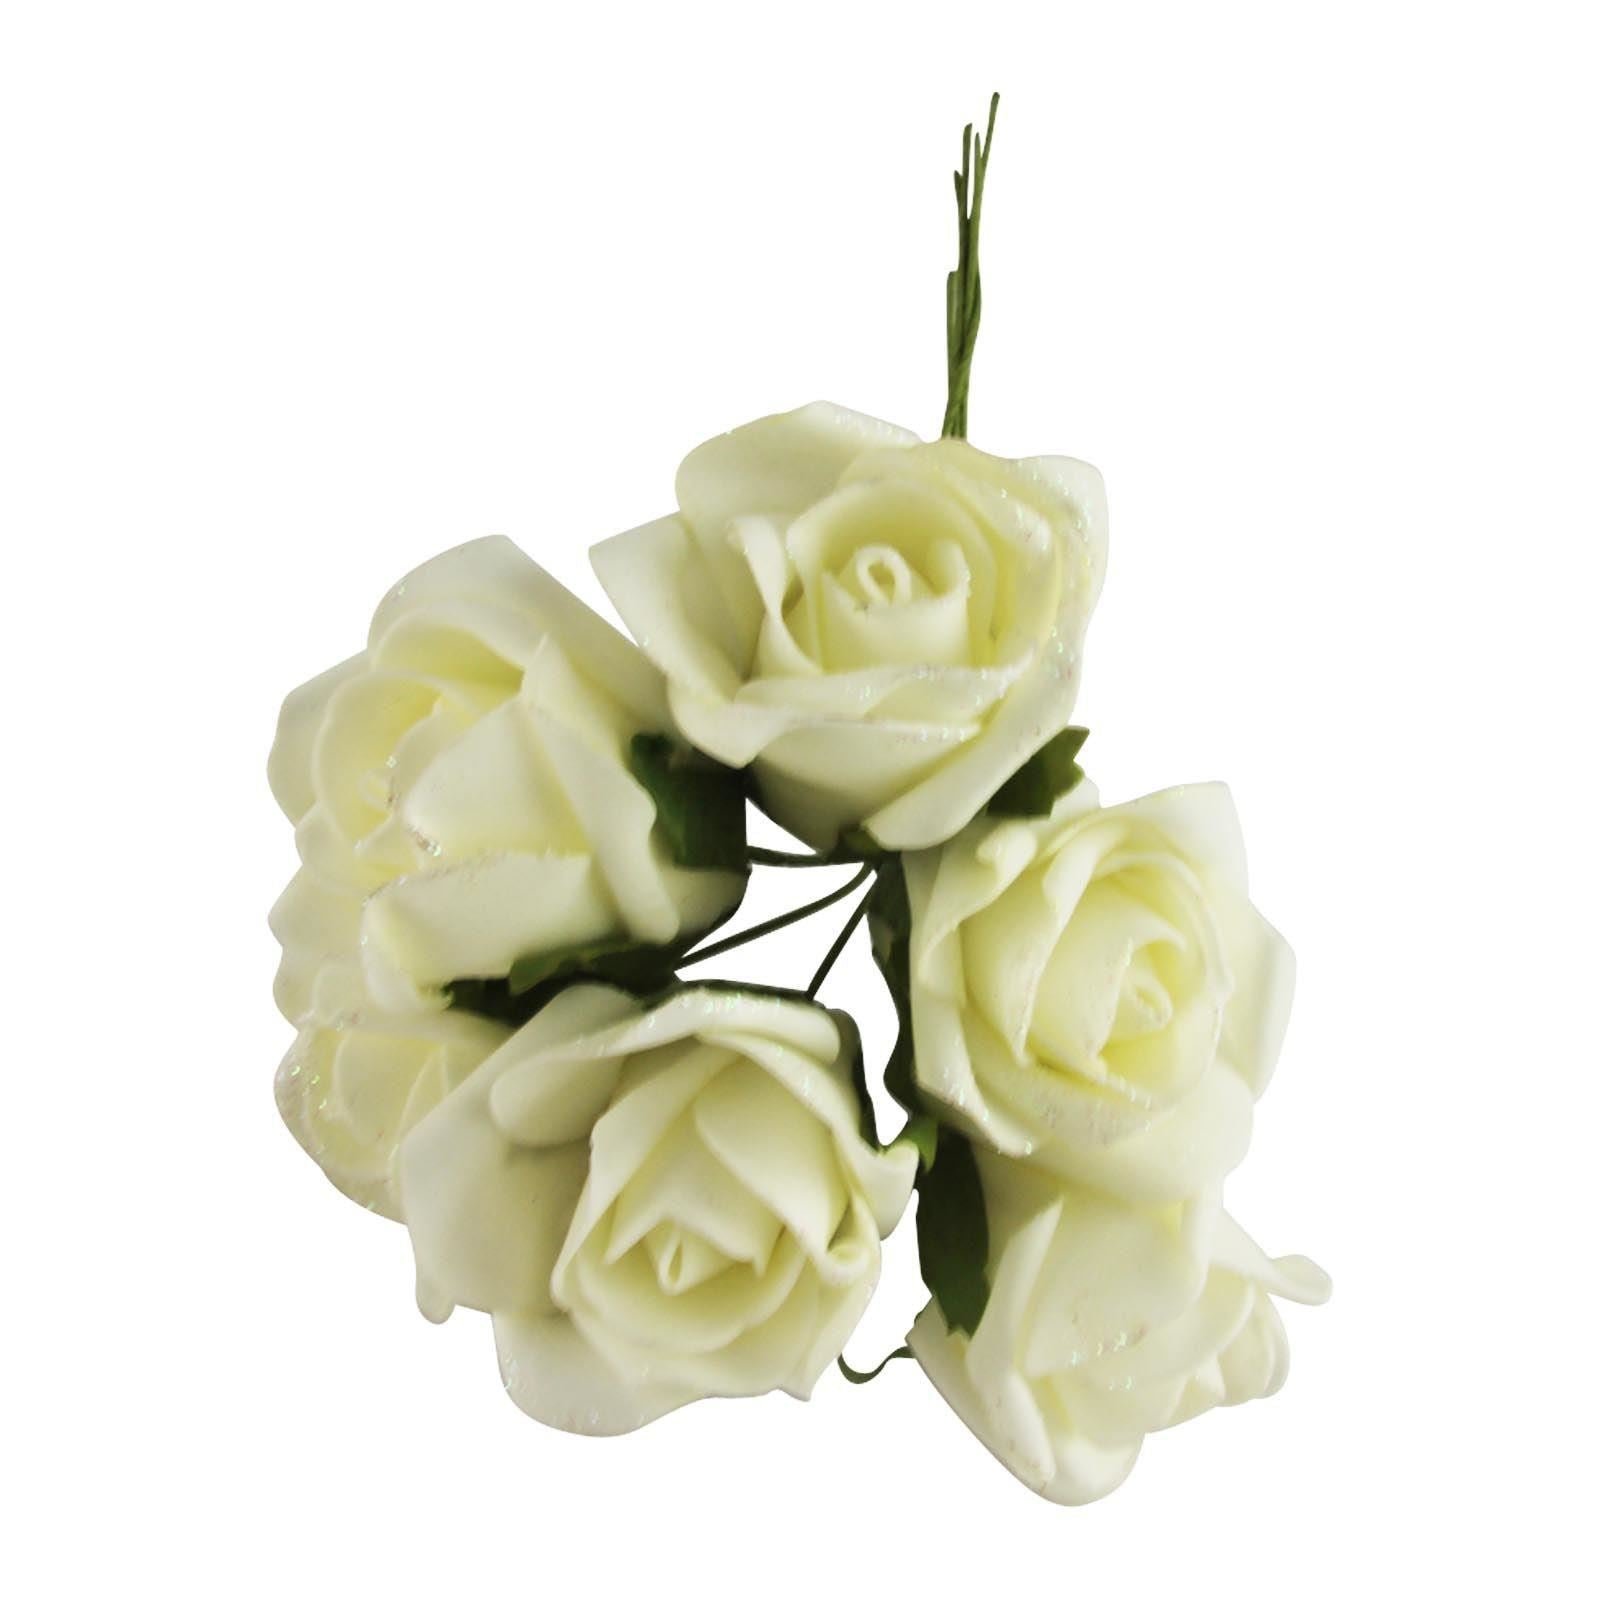 5 Bunches Ivory Glittered Foam Roses